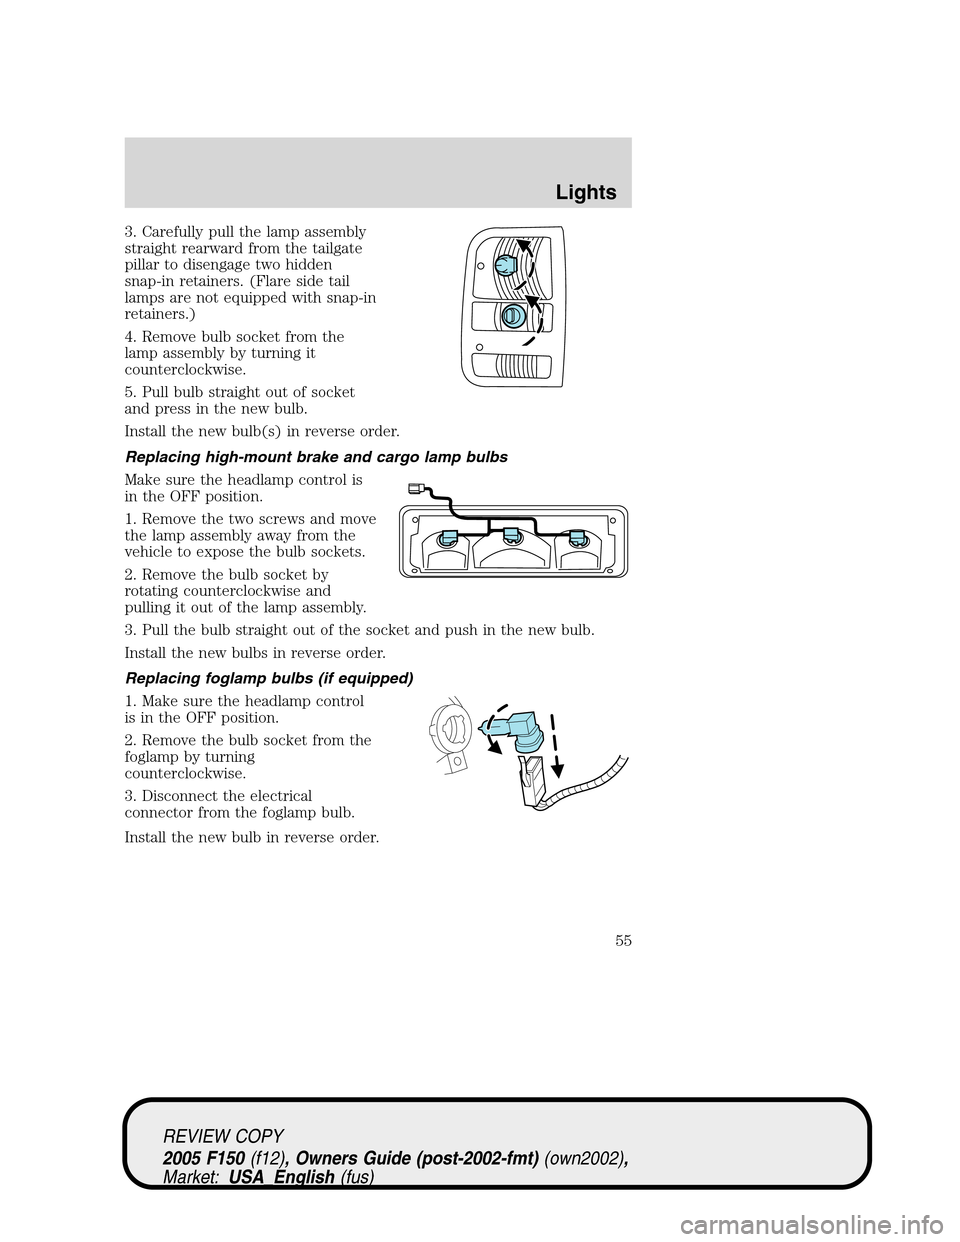 FORD F150 2005 11.G Owners Manual 3. Carefully pull the lamp assembly
straight rearward from the tailgate
pillar to disengage two hidden
snap-in retainers. (Flare side tail
lamps are not equipped with snap-in
retainers.)
4. Remove bul